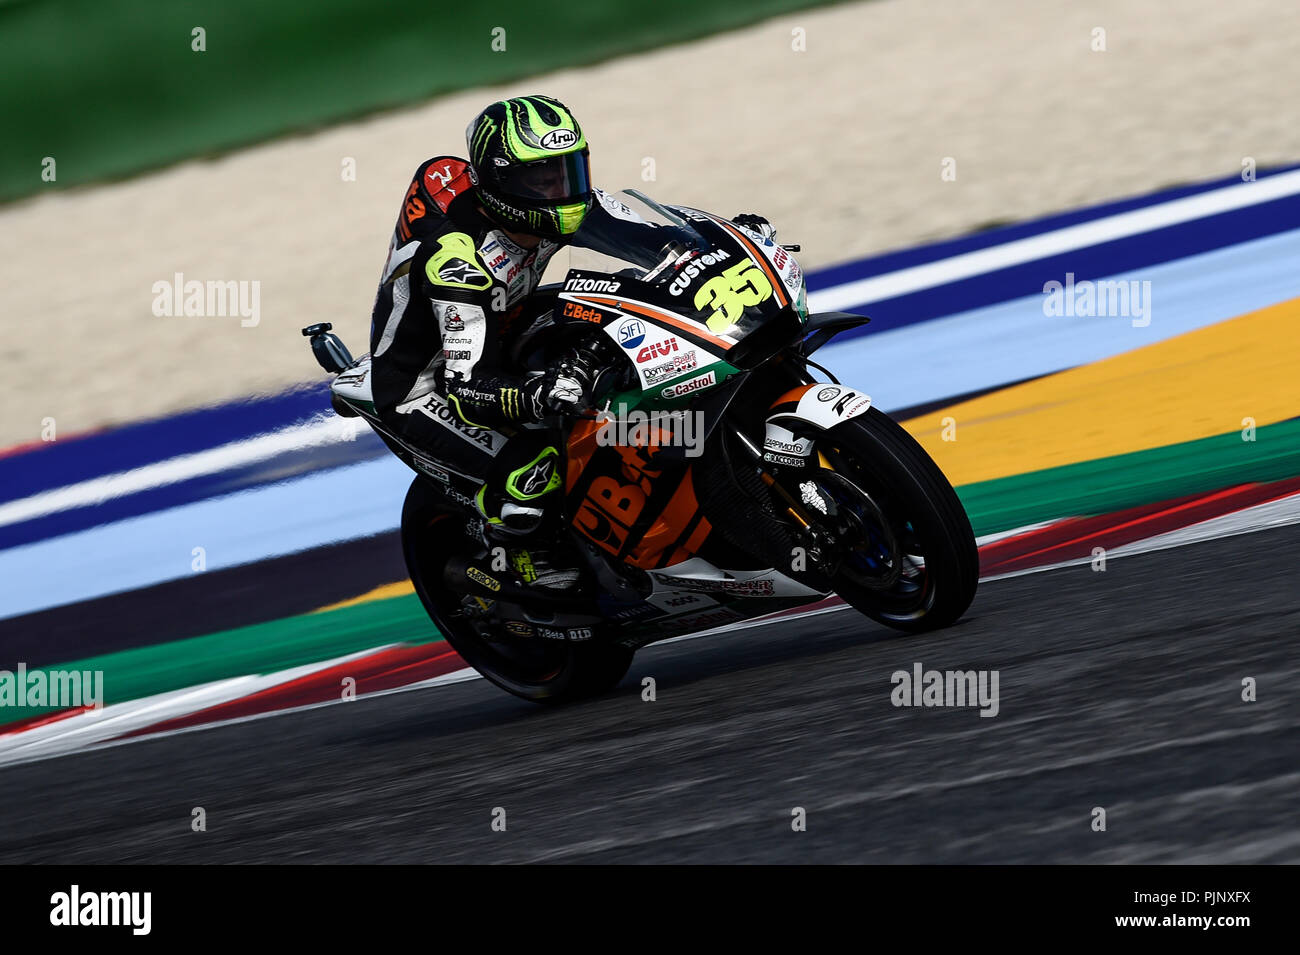 Misano, Misano World Circuit, Italy. 8th Sep, 2018. Italian Motorcycle Grand Prix, qualifying; Cal Crutchlow (LCR Honda) Credit: Action Plus Sports/Alamy Live News Stock Photo